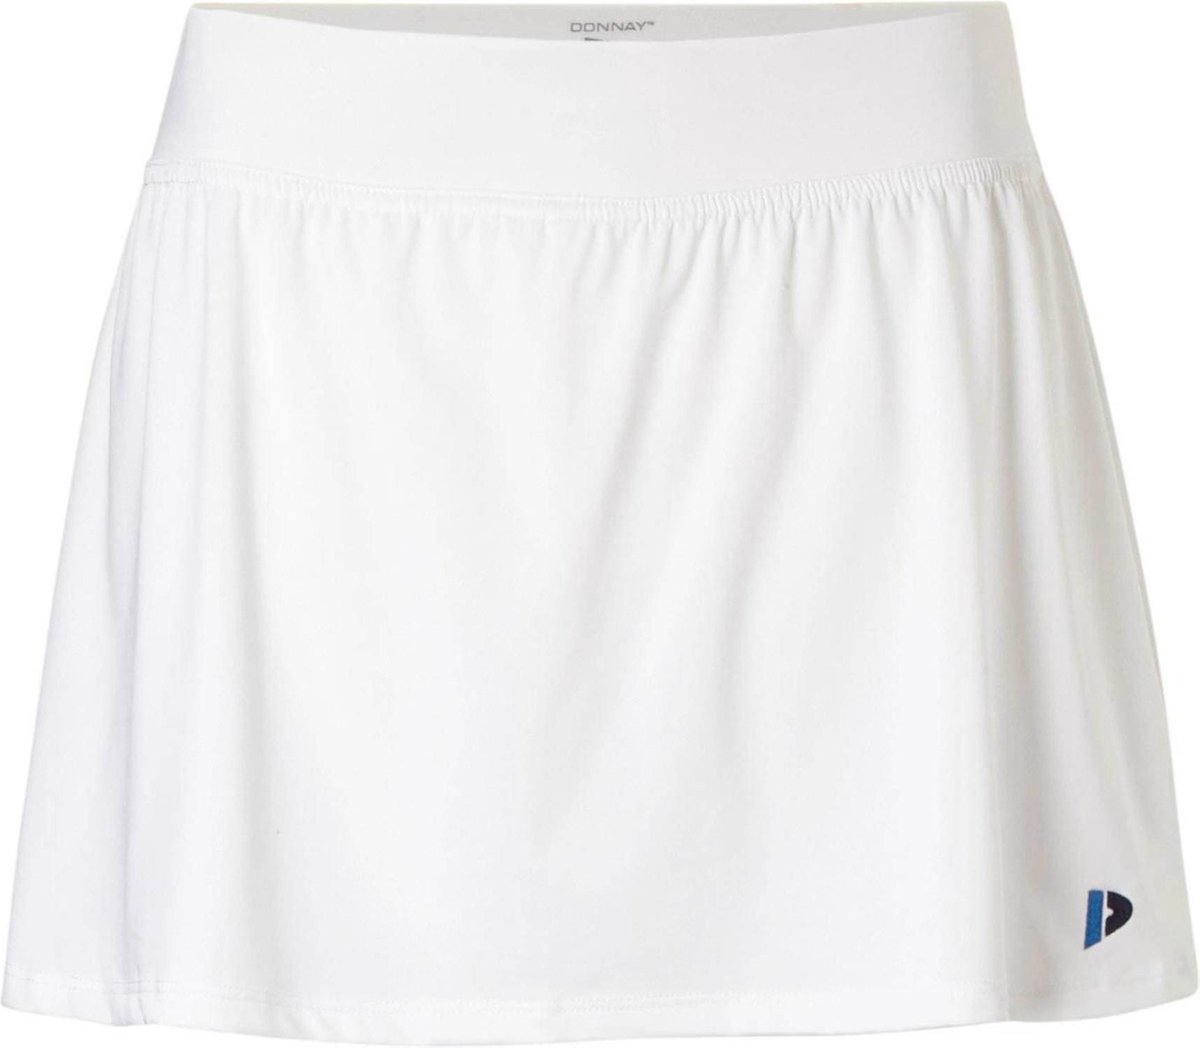 Donnay Cooldry Skirt - Sportrok - Dames - Maat S - Wit